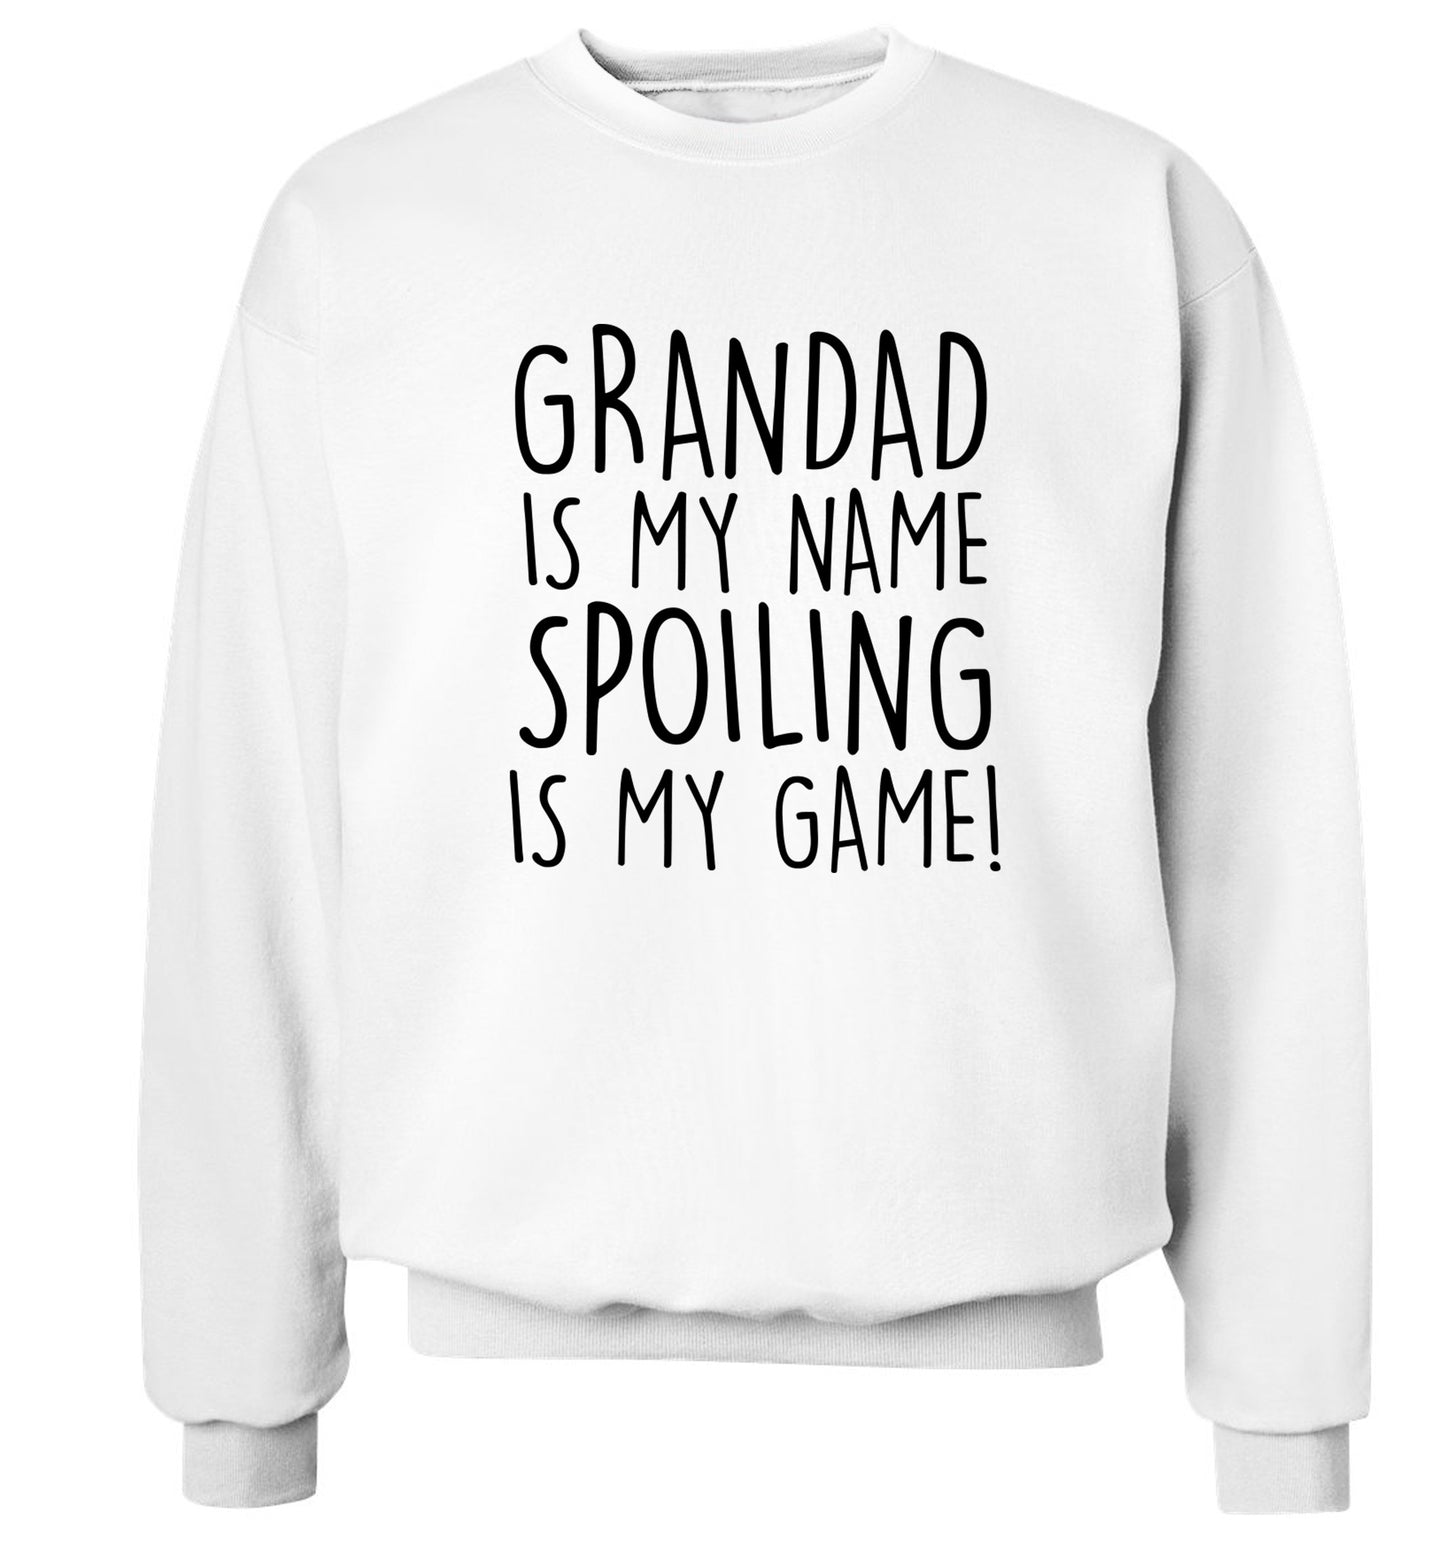 Grandad is my name, spoiling is my game Adult's unisex white Sweater 2XL